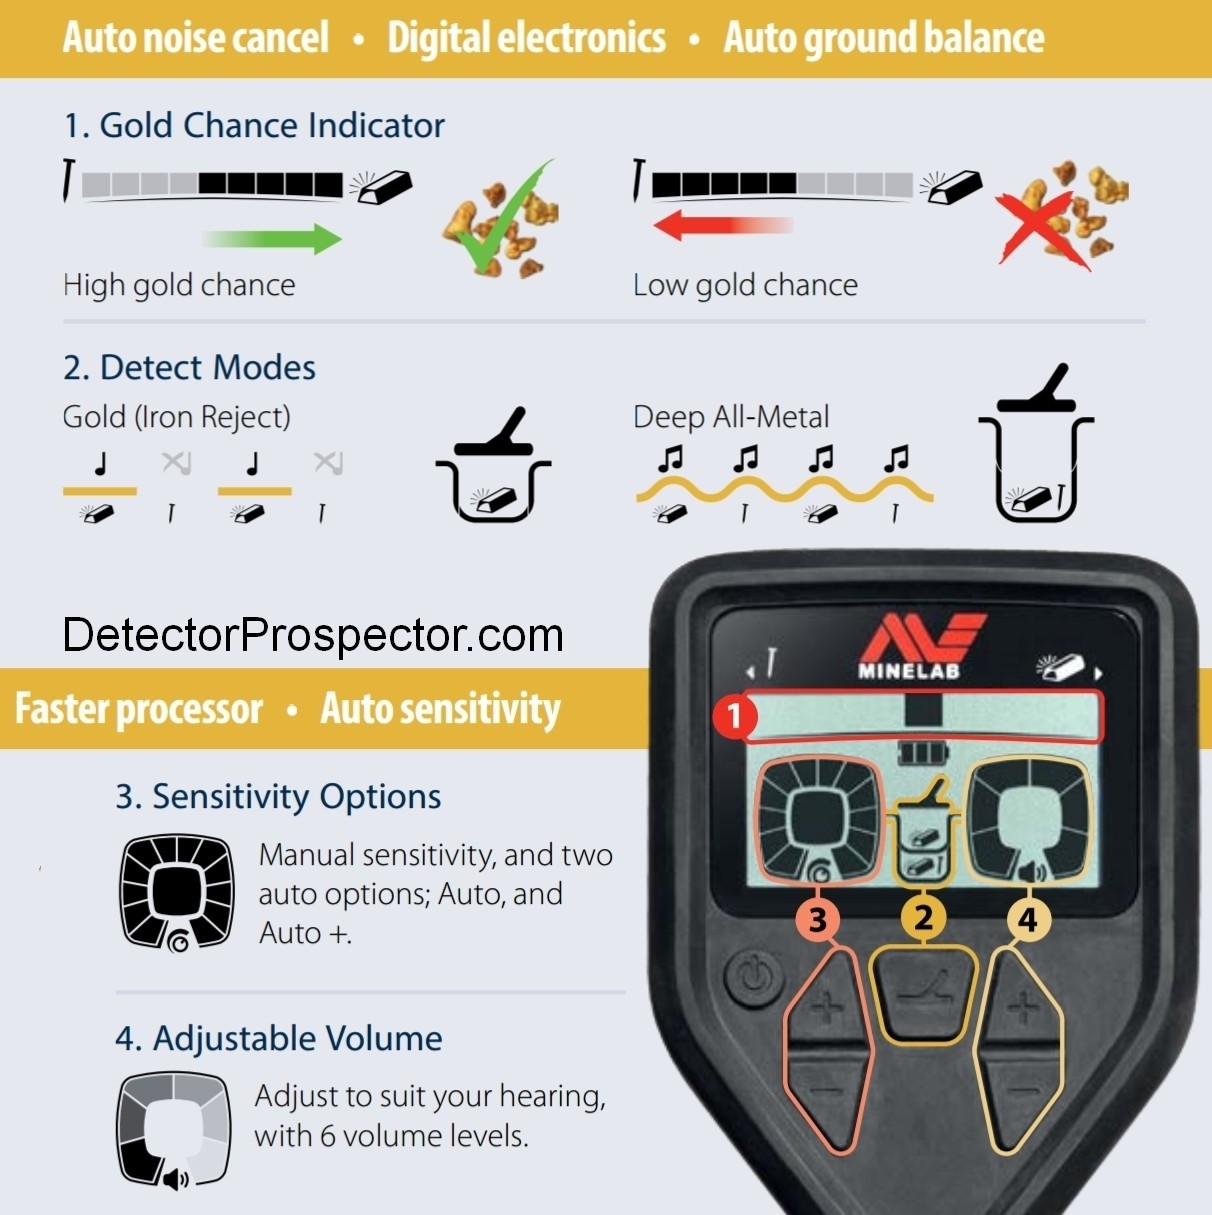 minelab-gold-monster-1000-control-guide.